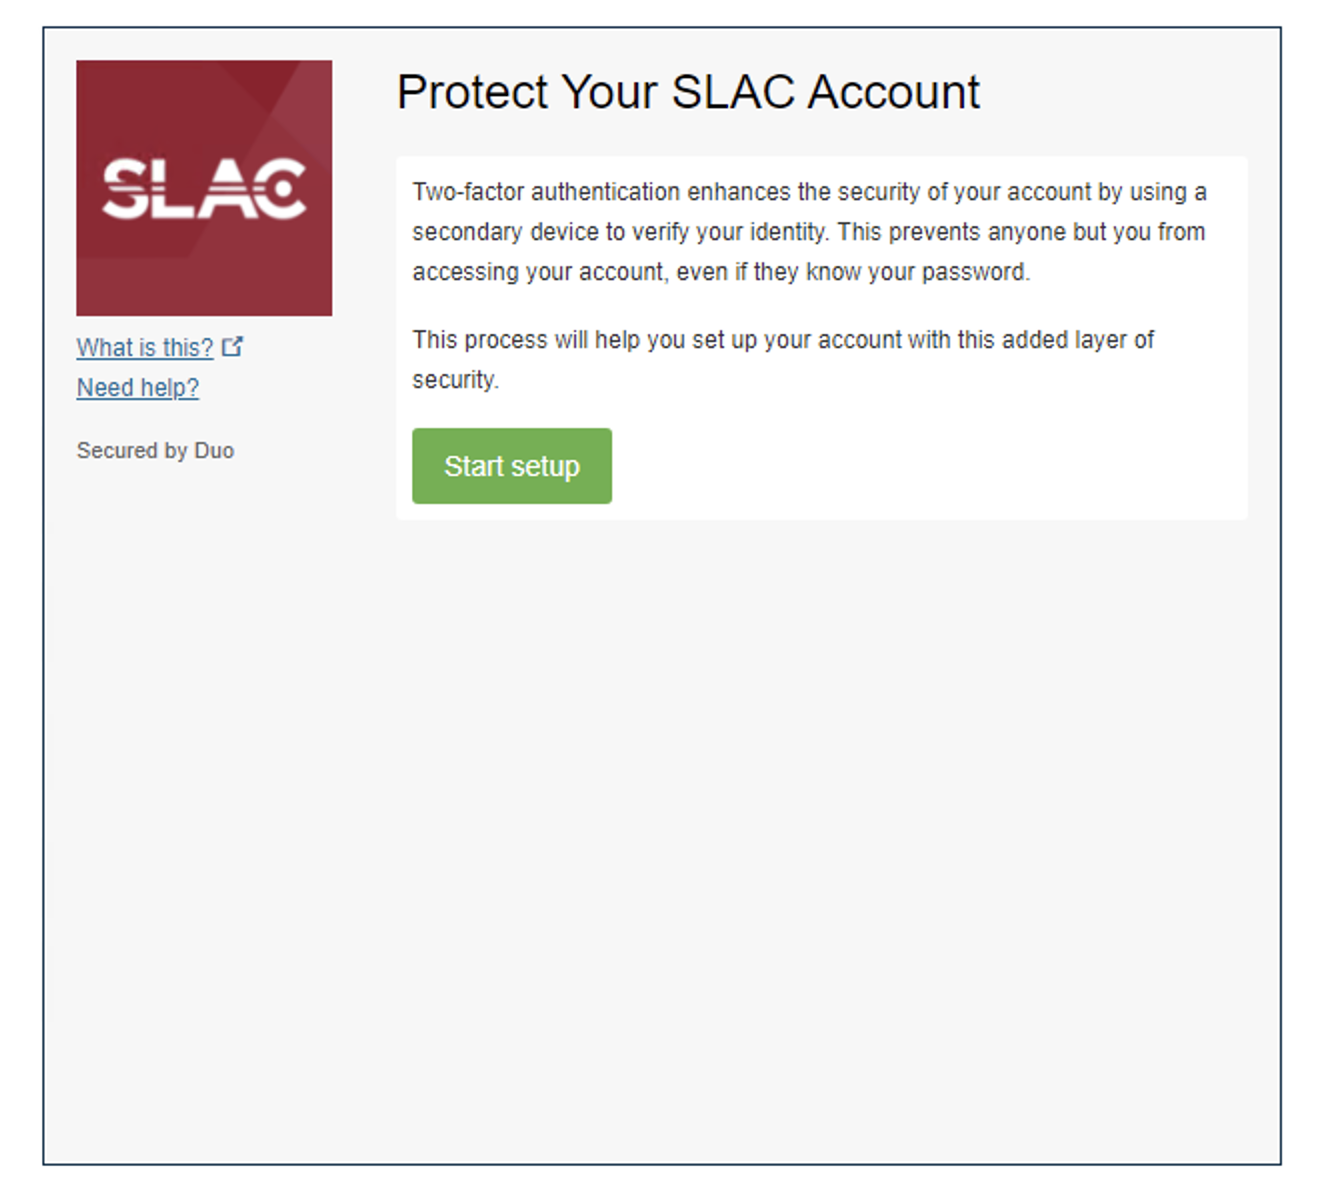 Screenshot of the Duo first page, titles "Protect Your SLAC Account"